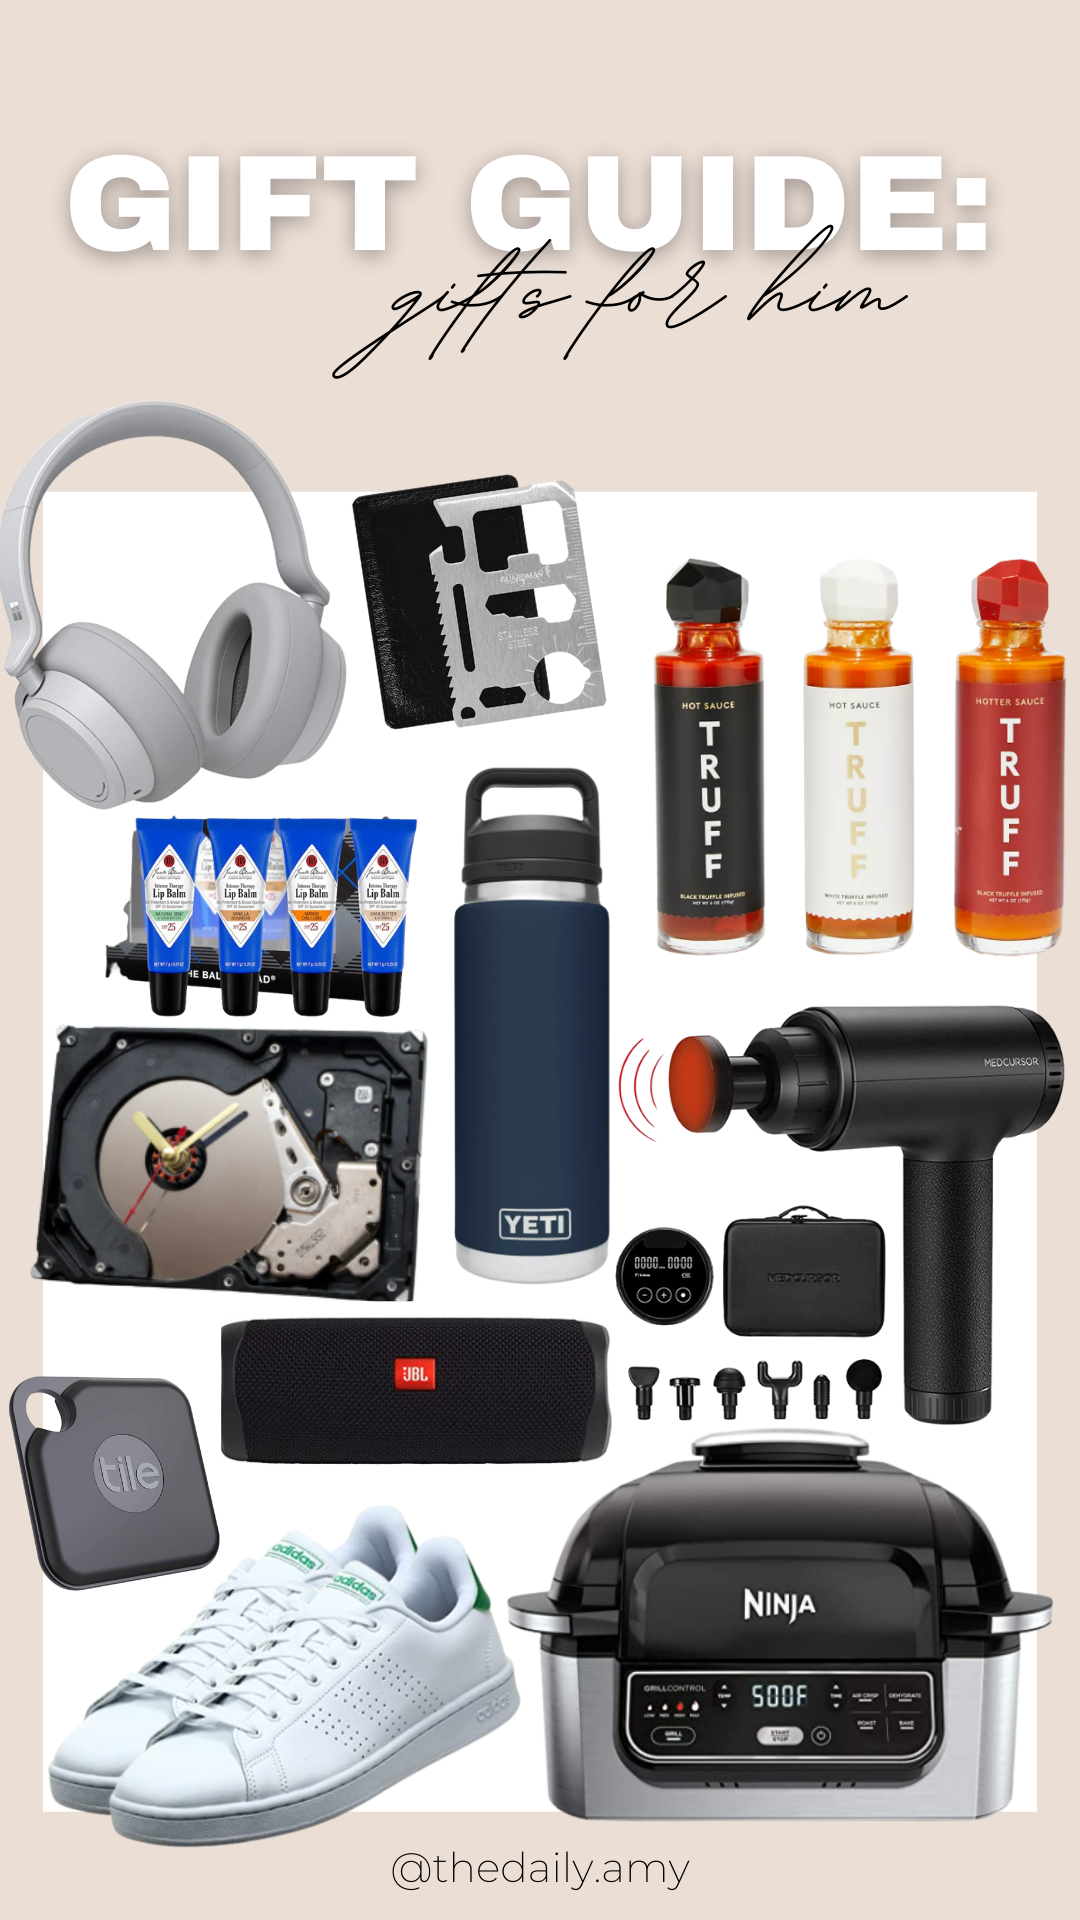 Collage of items with a pink and white background. Has Text that reads: Gift Guide: Gifts for him @thedaily.amy. Collage of items include gray headphones, multi use tool, truffle sauce, clock, lip balm, water bottle. massager, white sneakers, ninja foodie grill, tile and jbl speaker